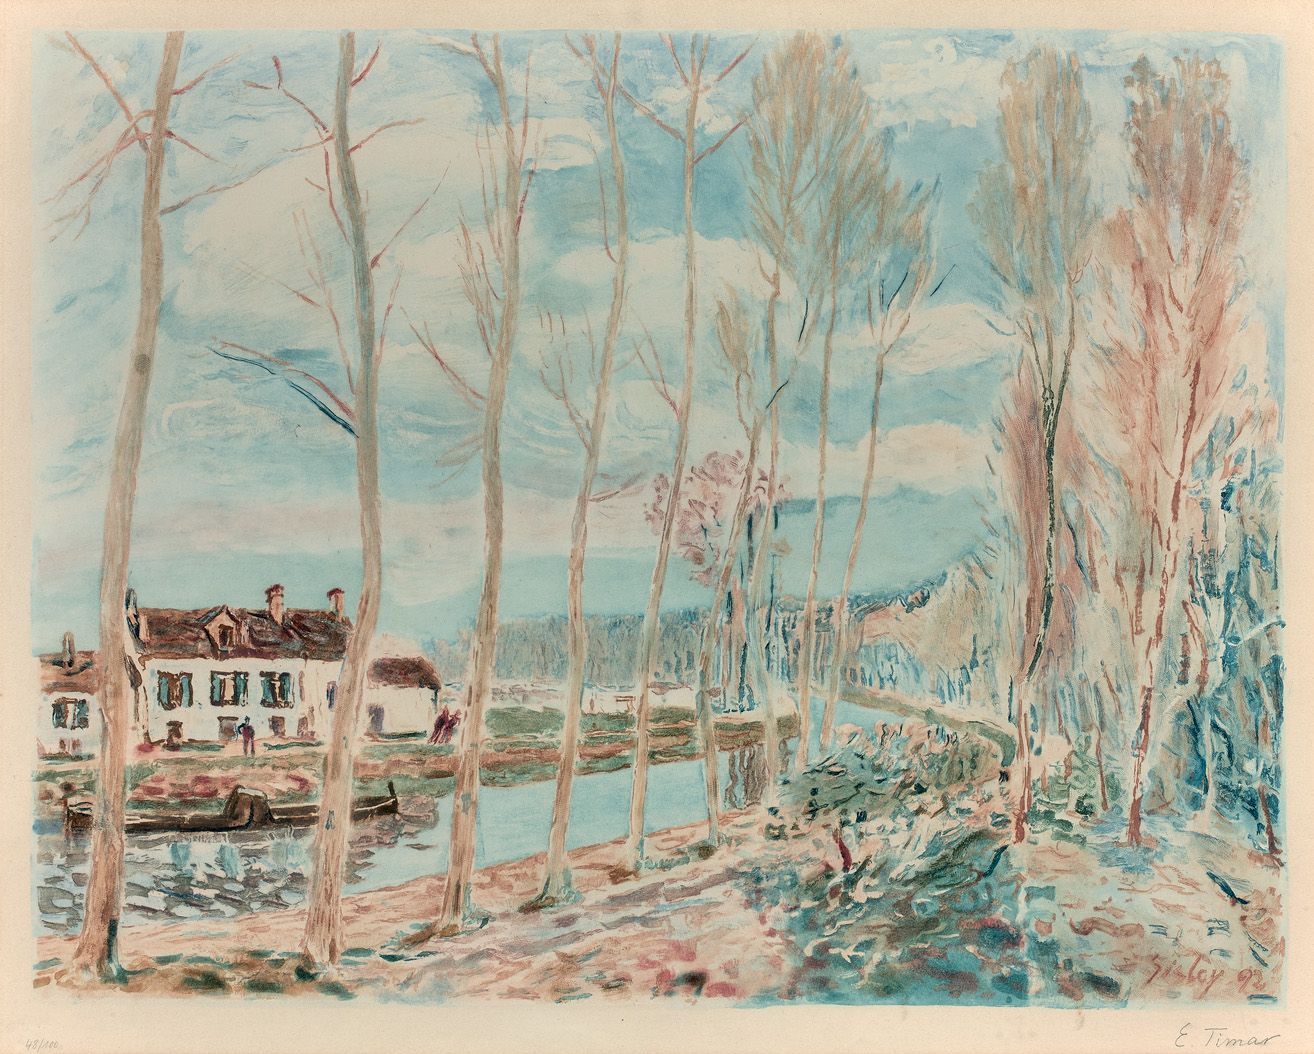 Null Emeric TIMAR (1898-1950), after Sisley

Chatou, the avenue of poplars

Lith&hellip;